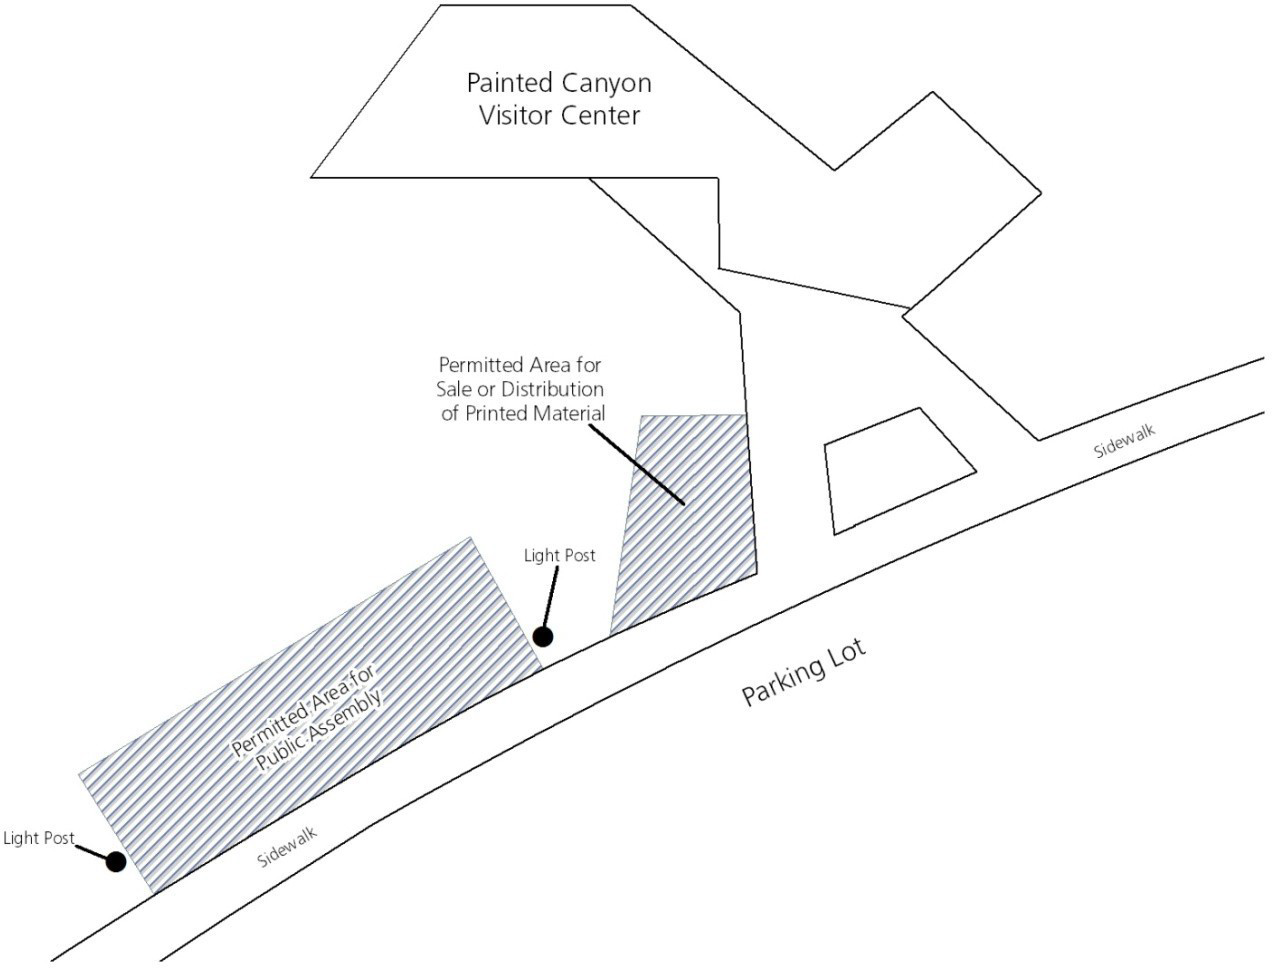 A simple map shows the Painted Canyon Visitor Center area with shaded areas showing the demonstration and printed materials distribution areas as indicated by the text of the document.